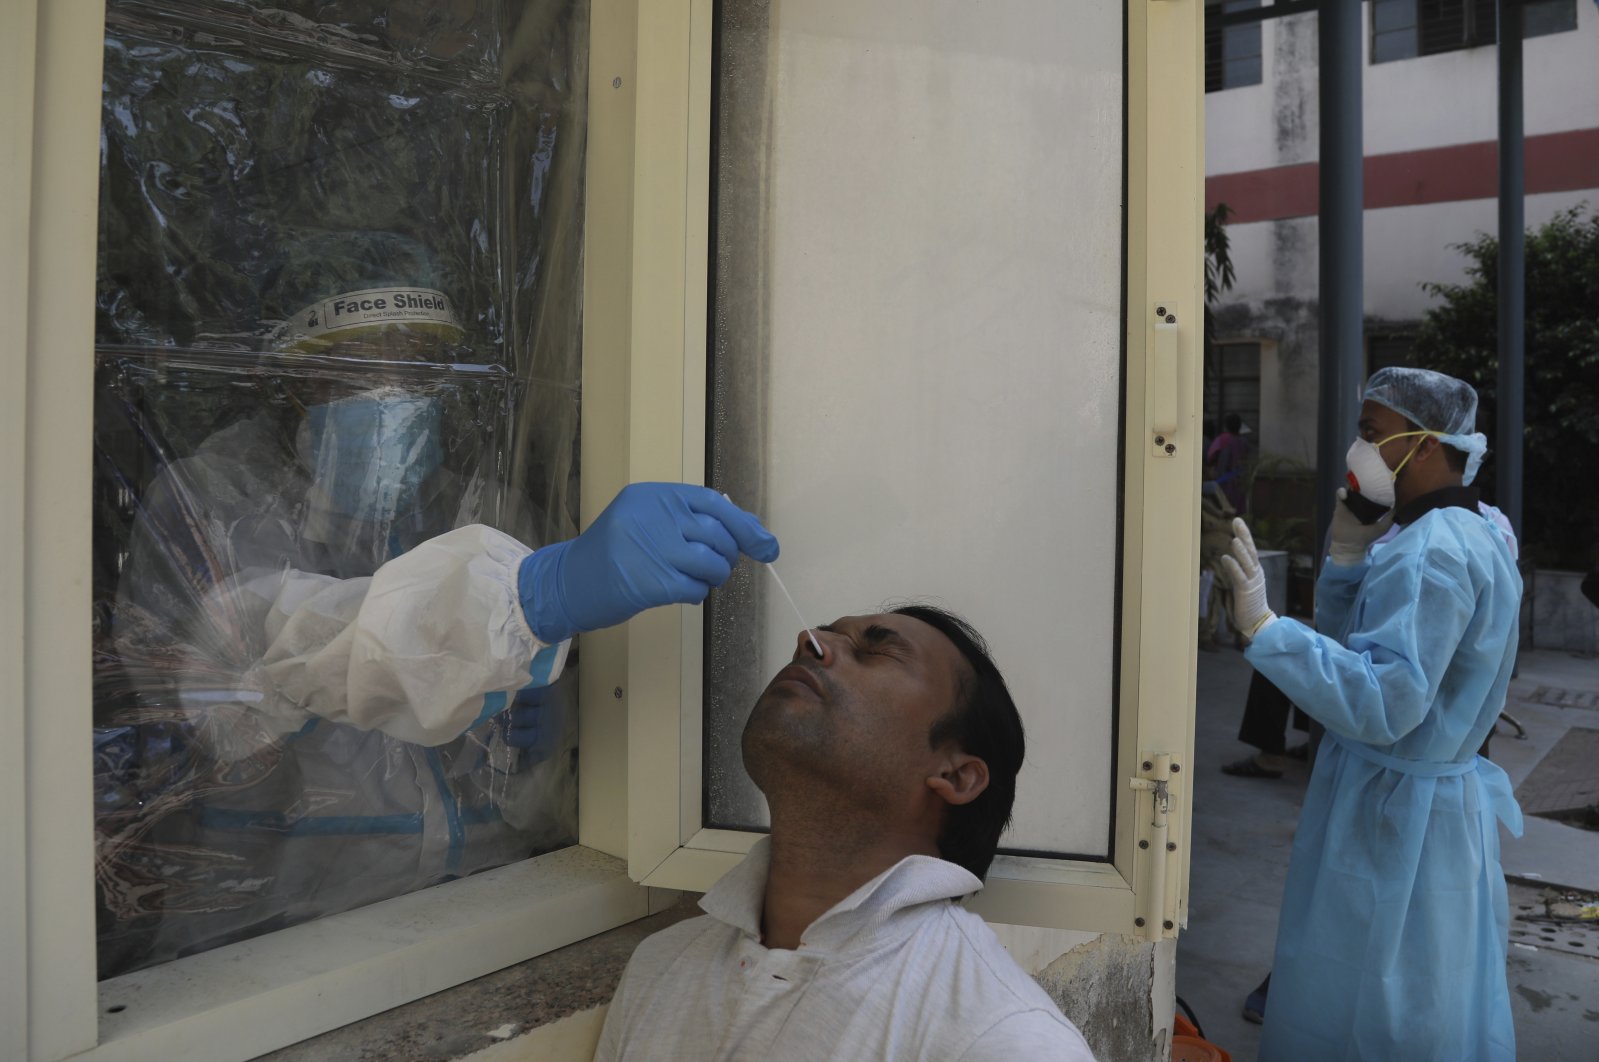 A health worker conducts COVID-19 test at a government hospital, New Delhi, Sept. 28, 2020. (AP Photo)